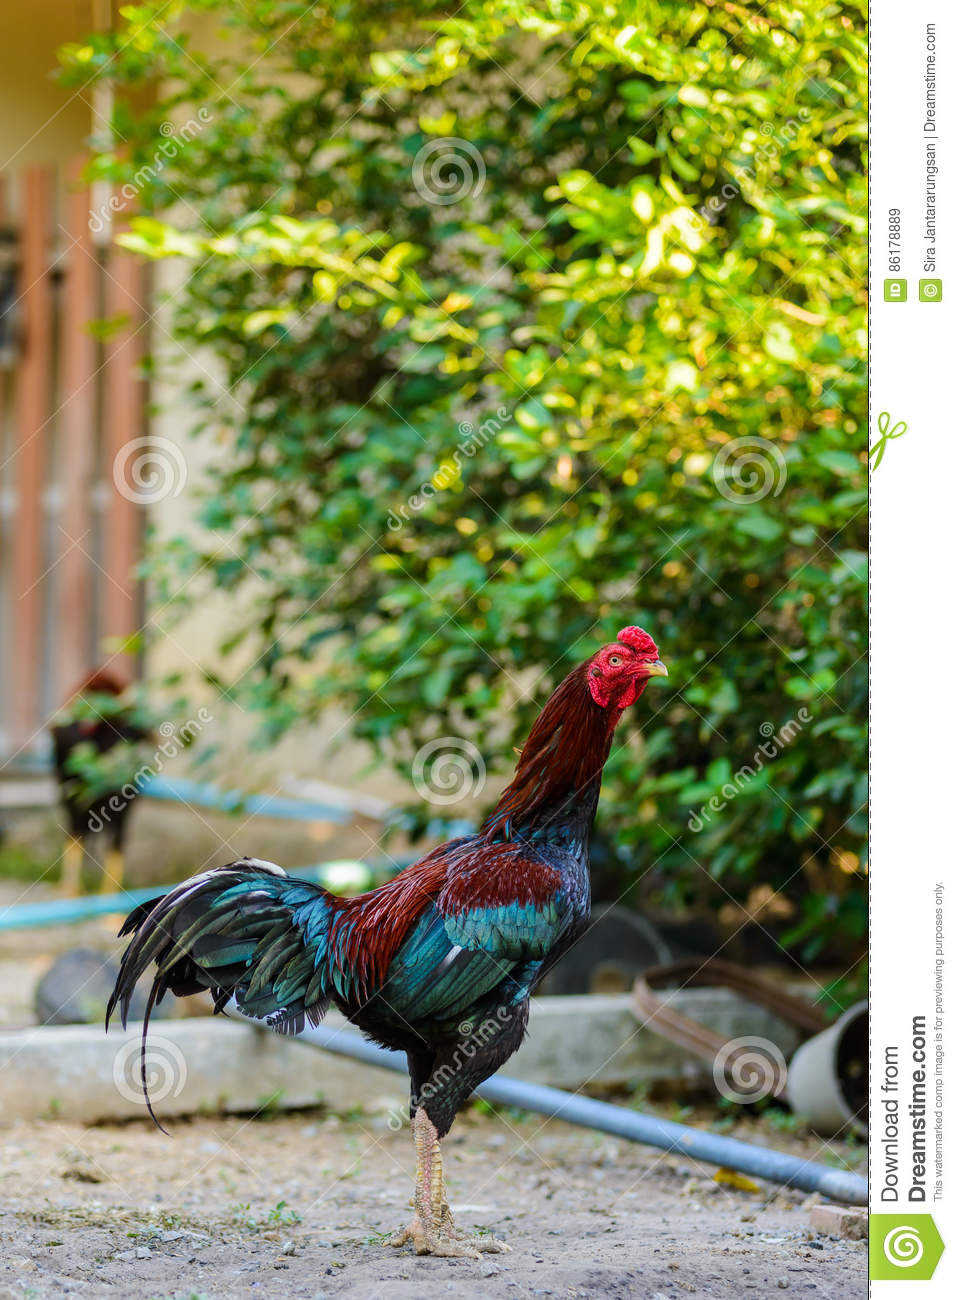 Colorful Rooster Or Fighting In The Farm Stock Image within Fighting Cock Calendar